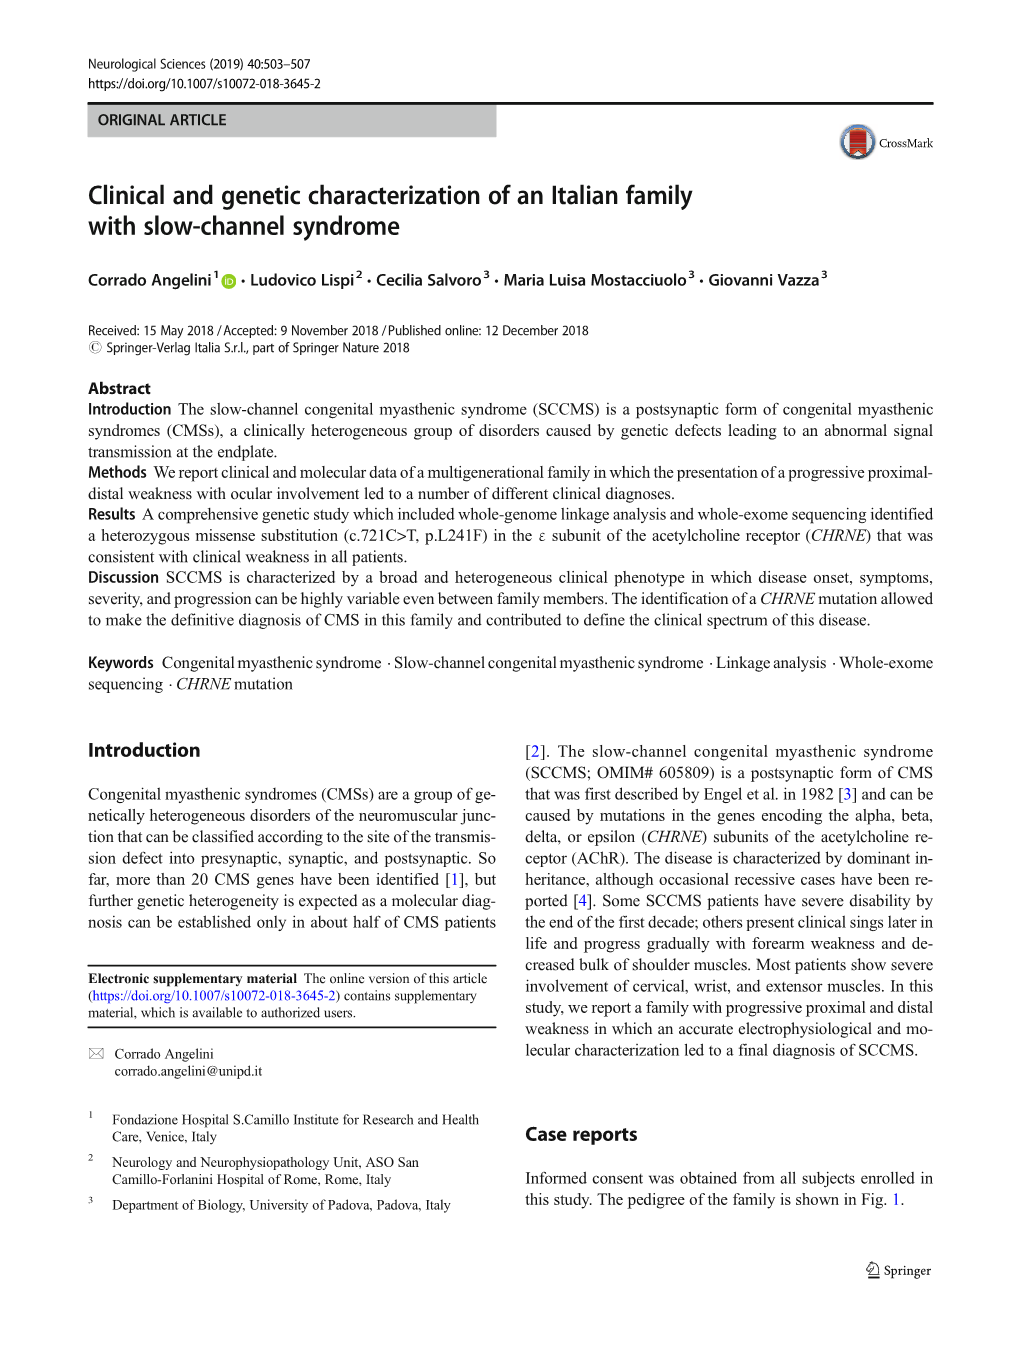 Clinical and Genetic Characterization of an Italian Family with Slow-Channel Syndrome